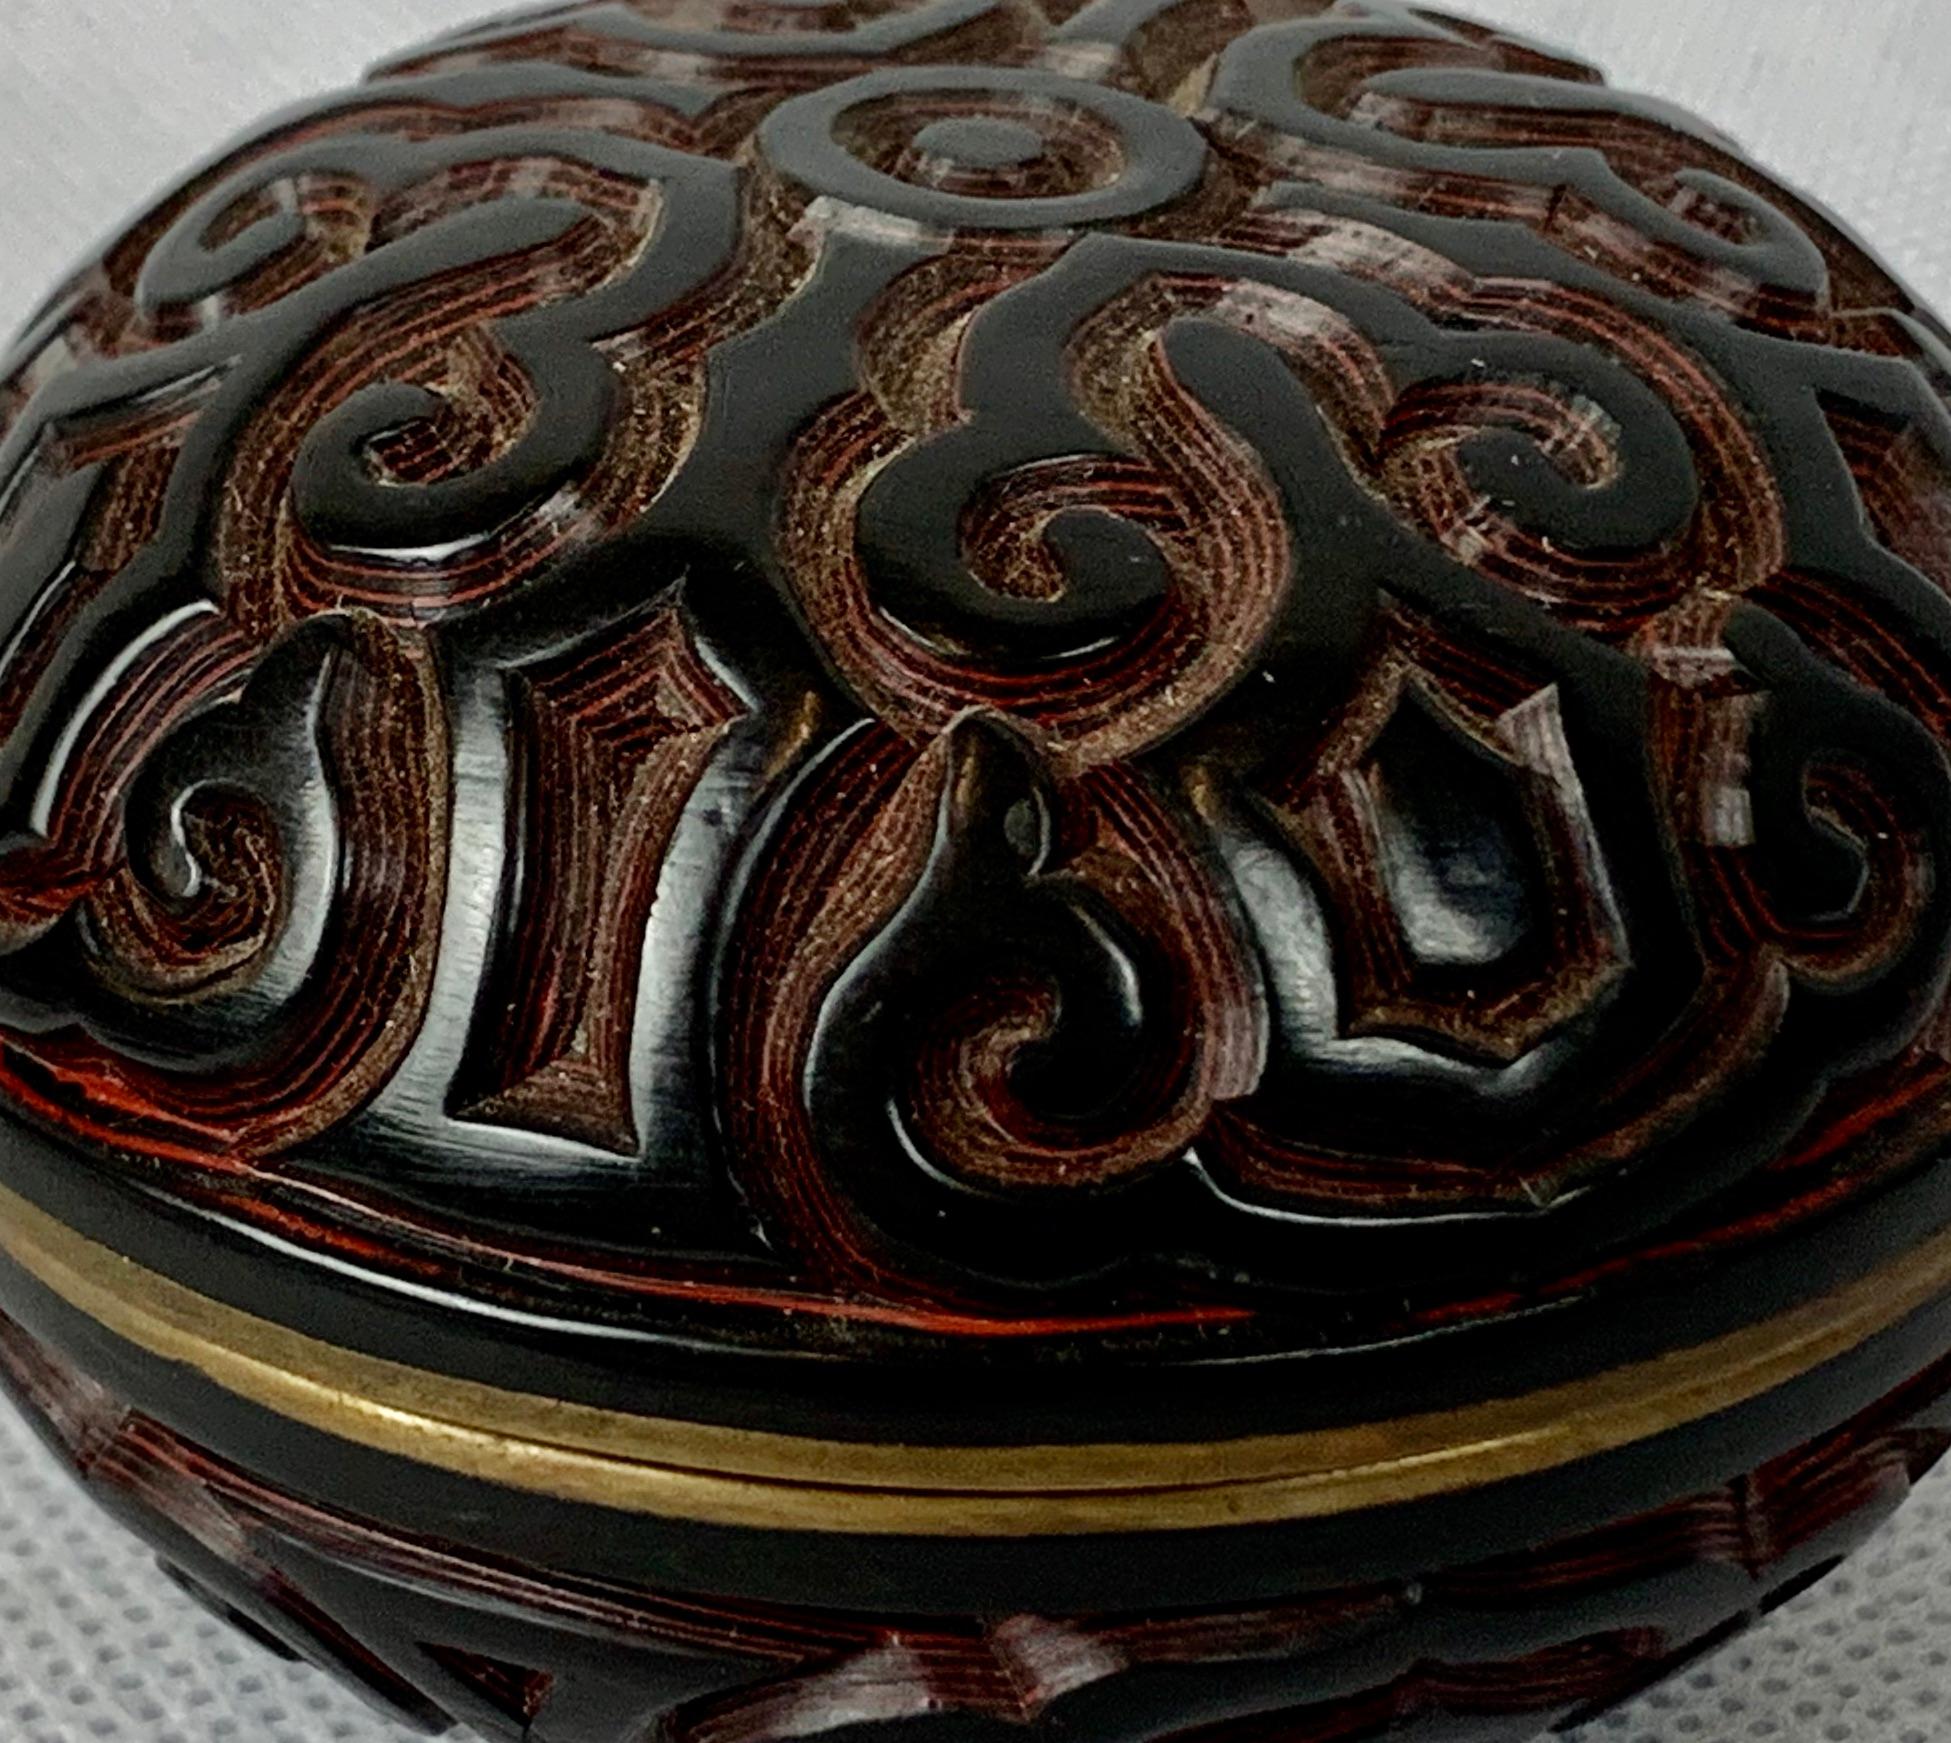 This is a Chinese two color Tixi cinnabar box or jar. Created early in the twentieth century with a stylized symbol design, black interior and brass collar. What makes this piece so interesting is the many layers of lacquer and very deep carving,